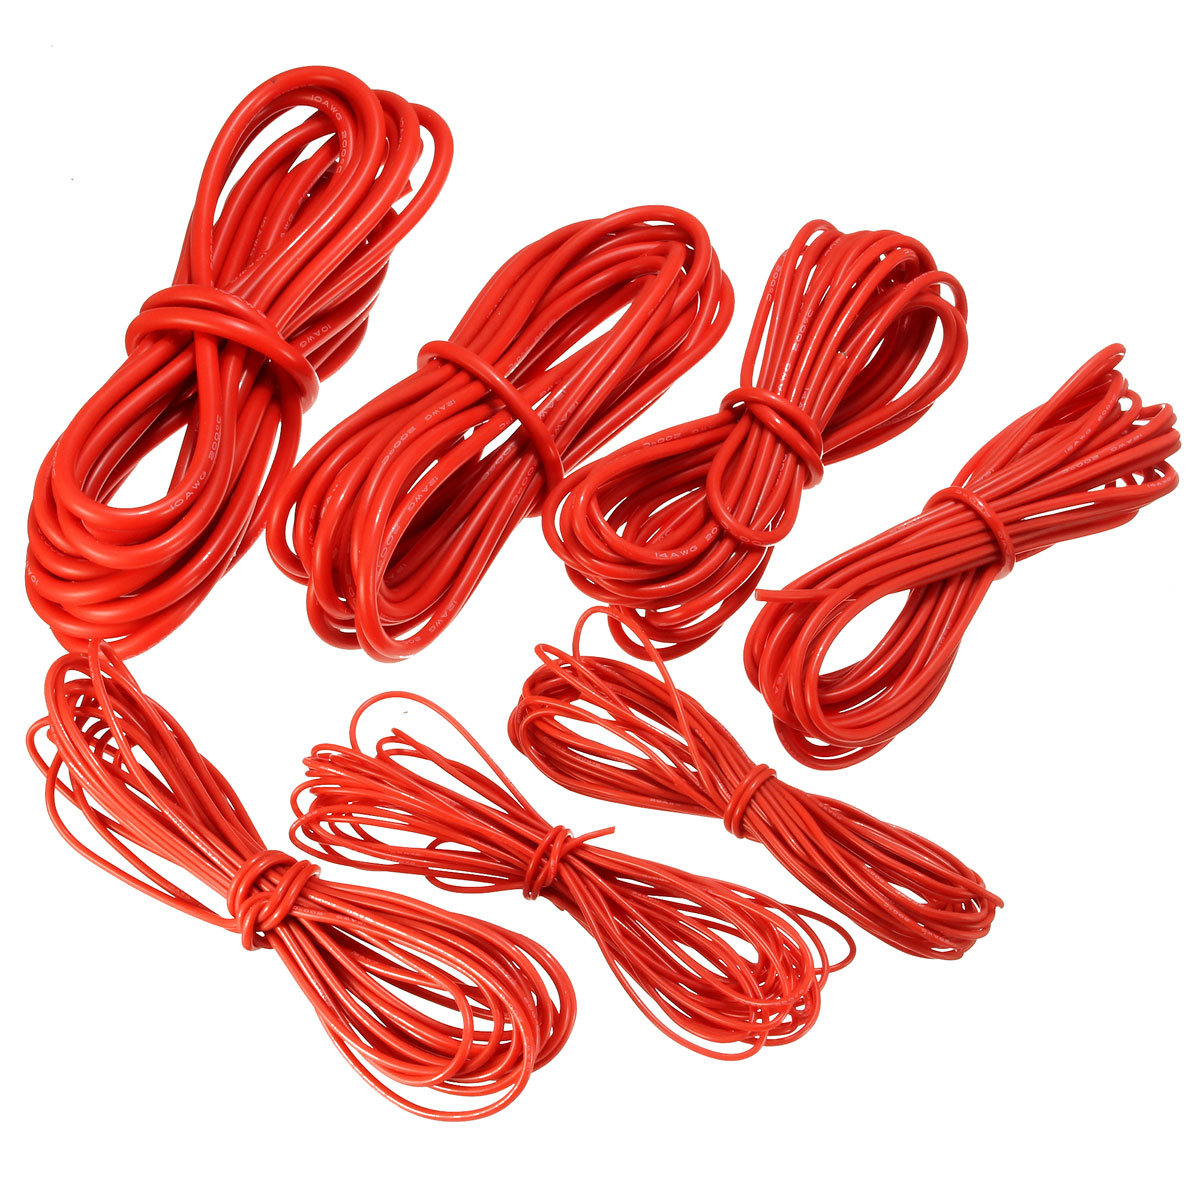 DANIU 5 Meter Red Silicone Wire Cable 10/12/14/16/18/20/22AWG Flexible Cable